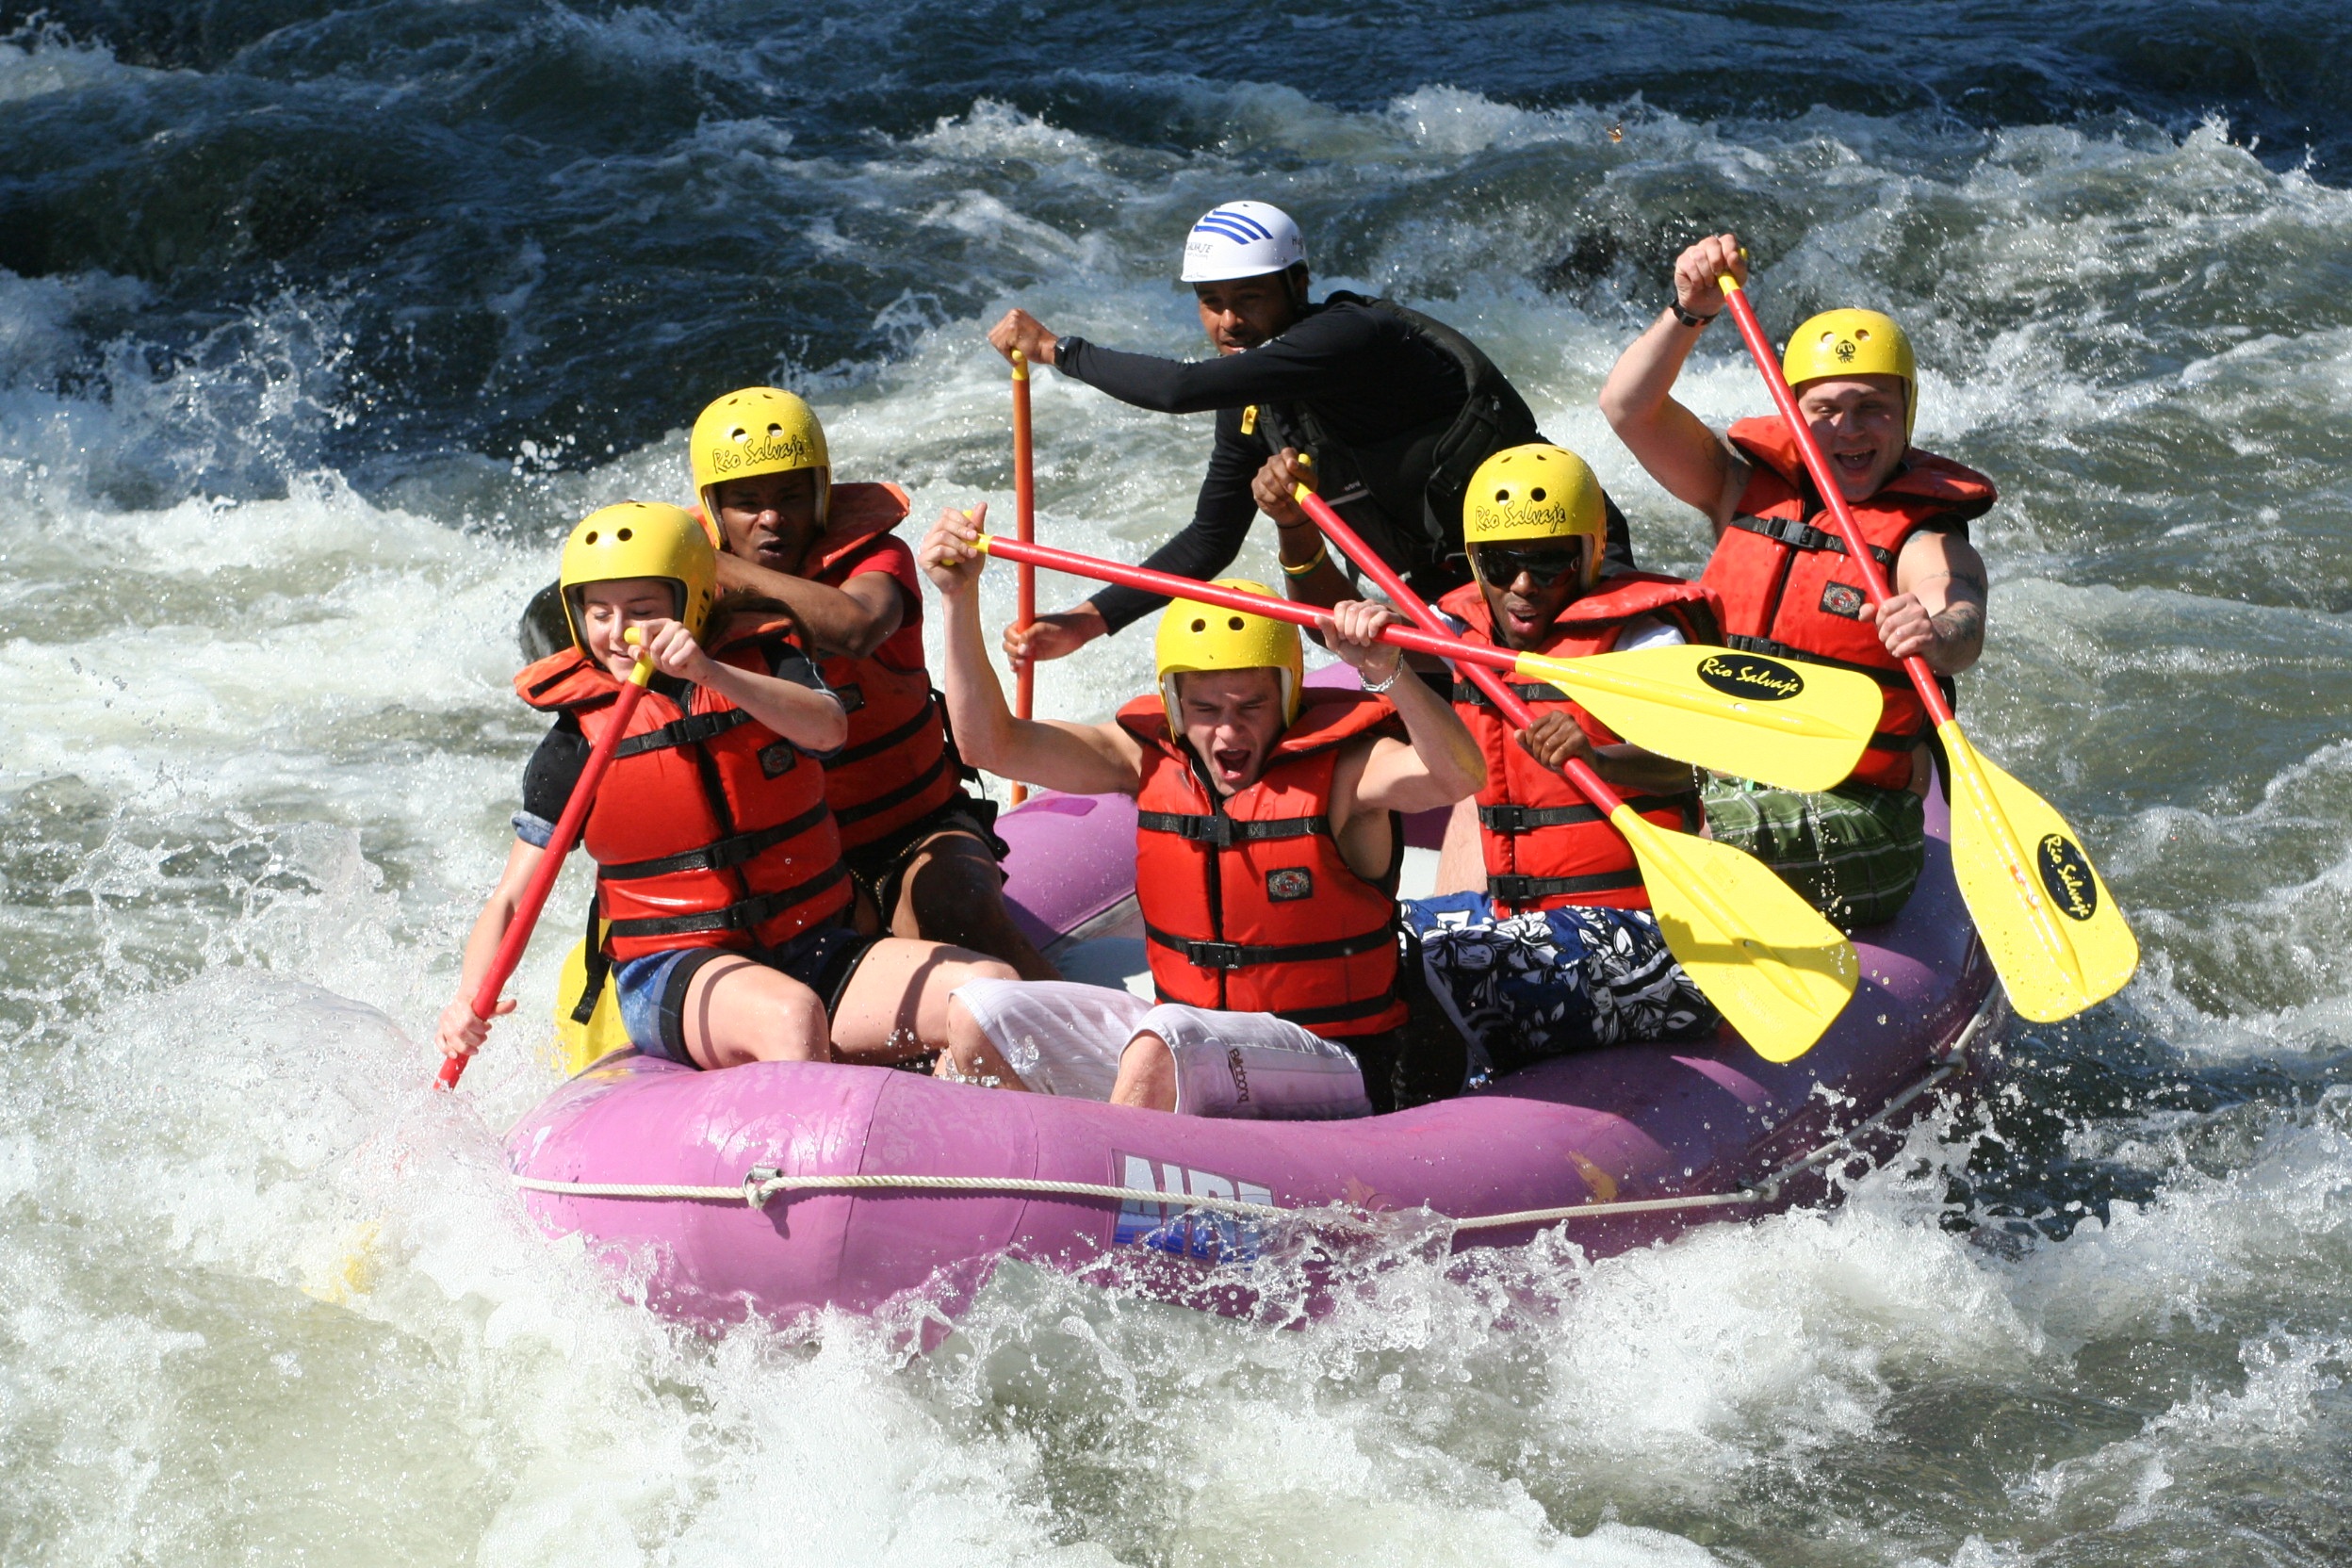 Rafting in the river photo